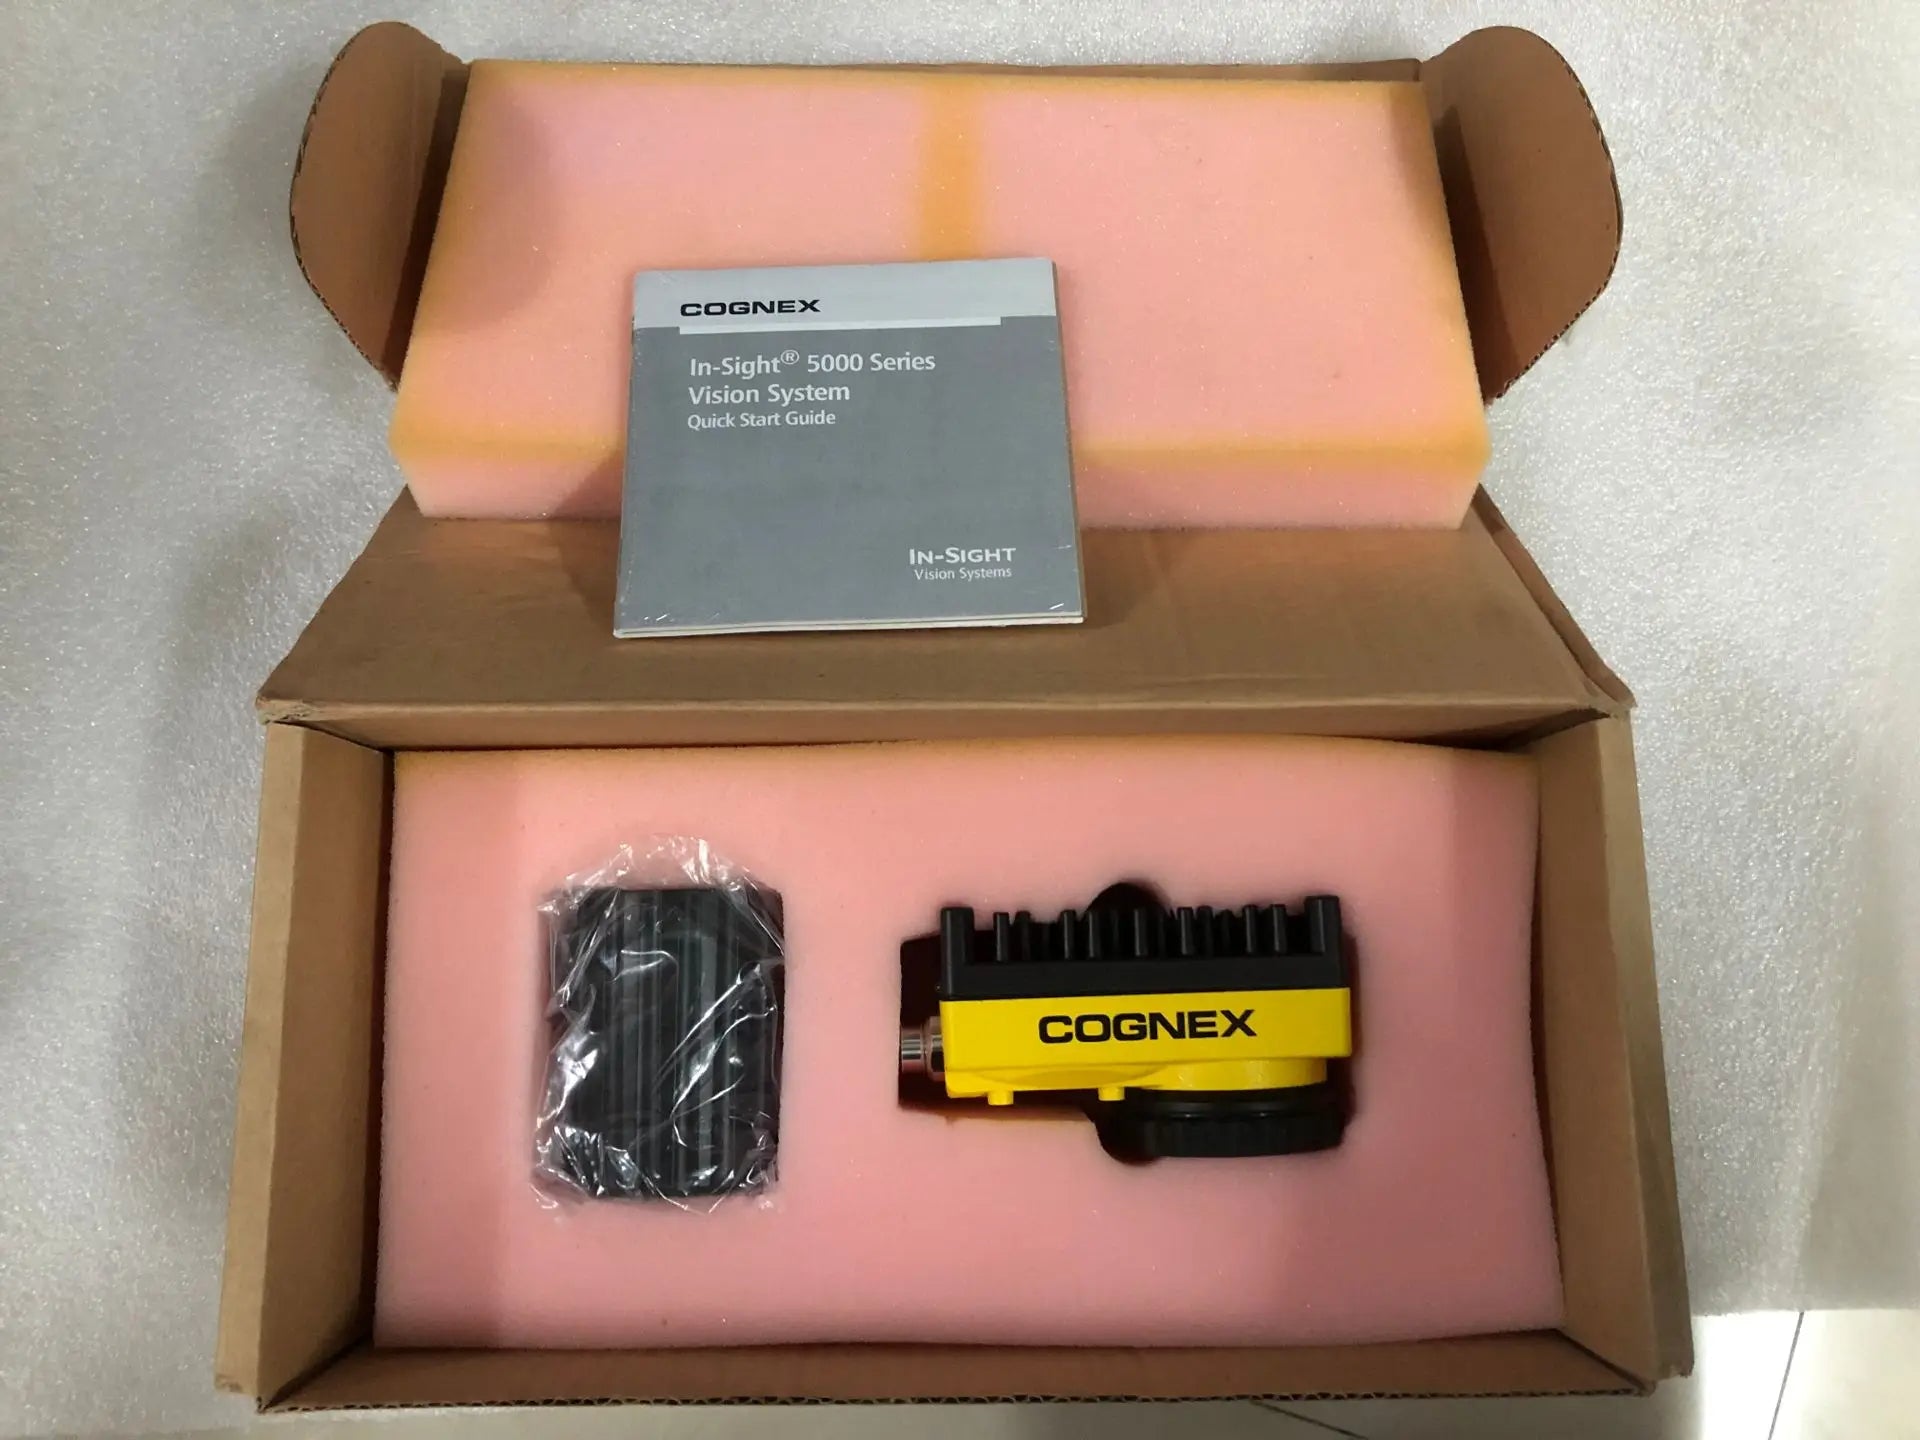 New In Box IS5604-01 828-0320-1R Cognex In-Sight 5000 Series Vision System